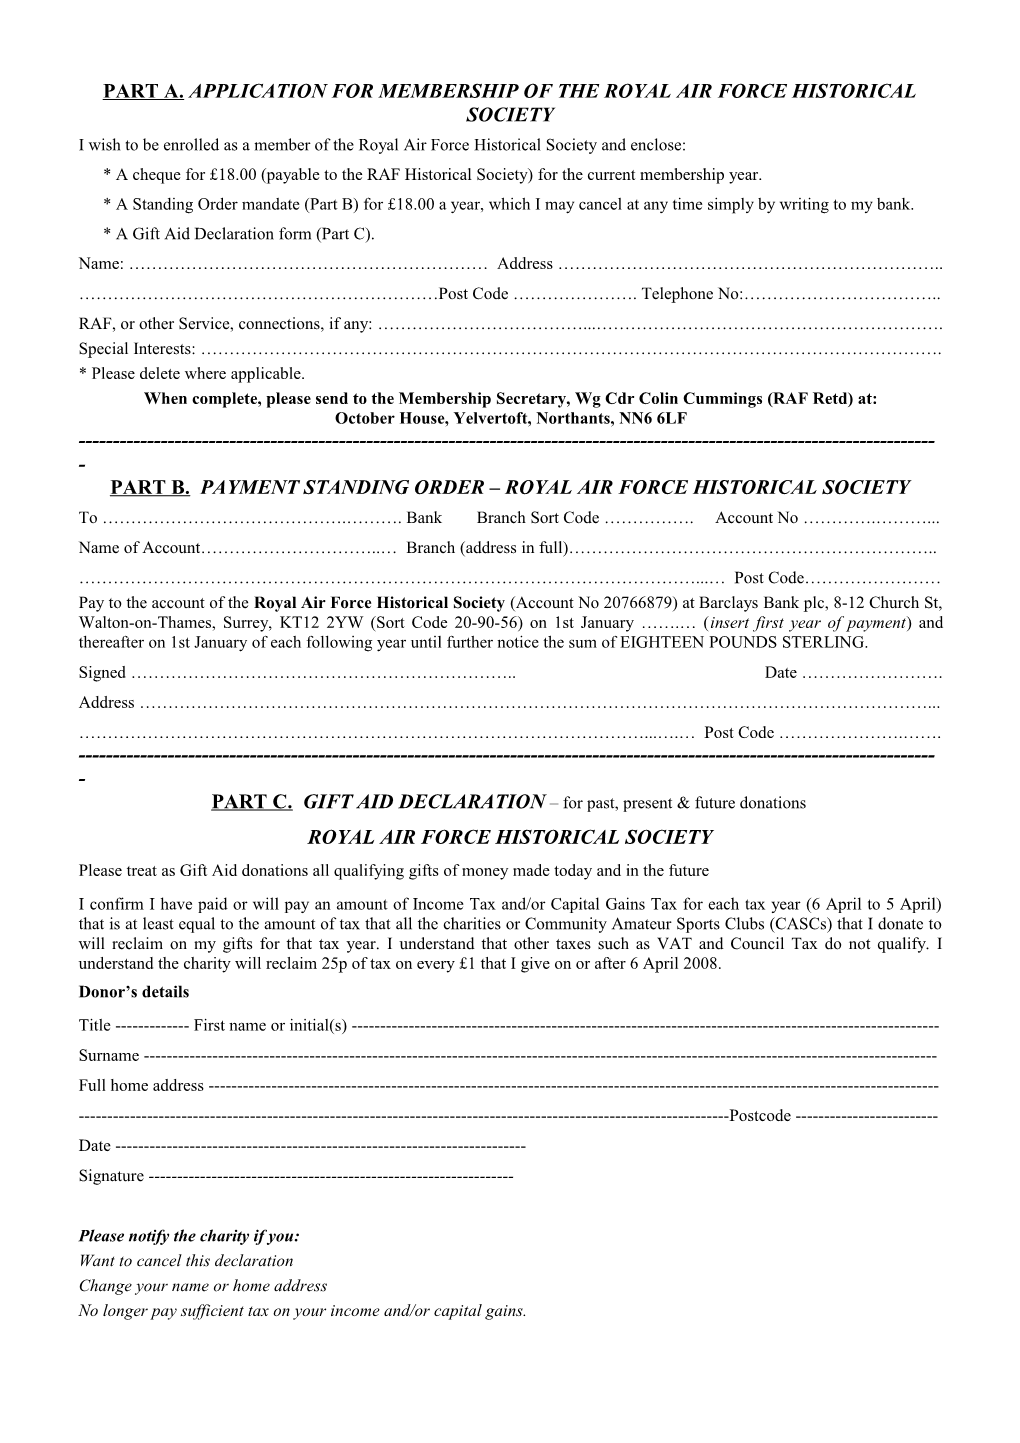 Part A. Application for Membership of the Royal Air Force Historical Society